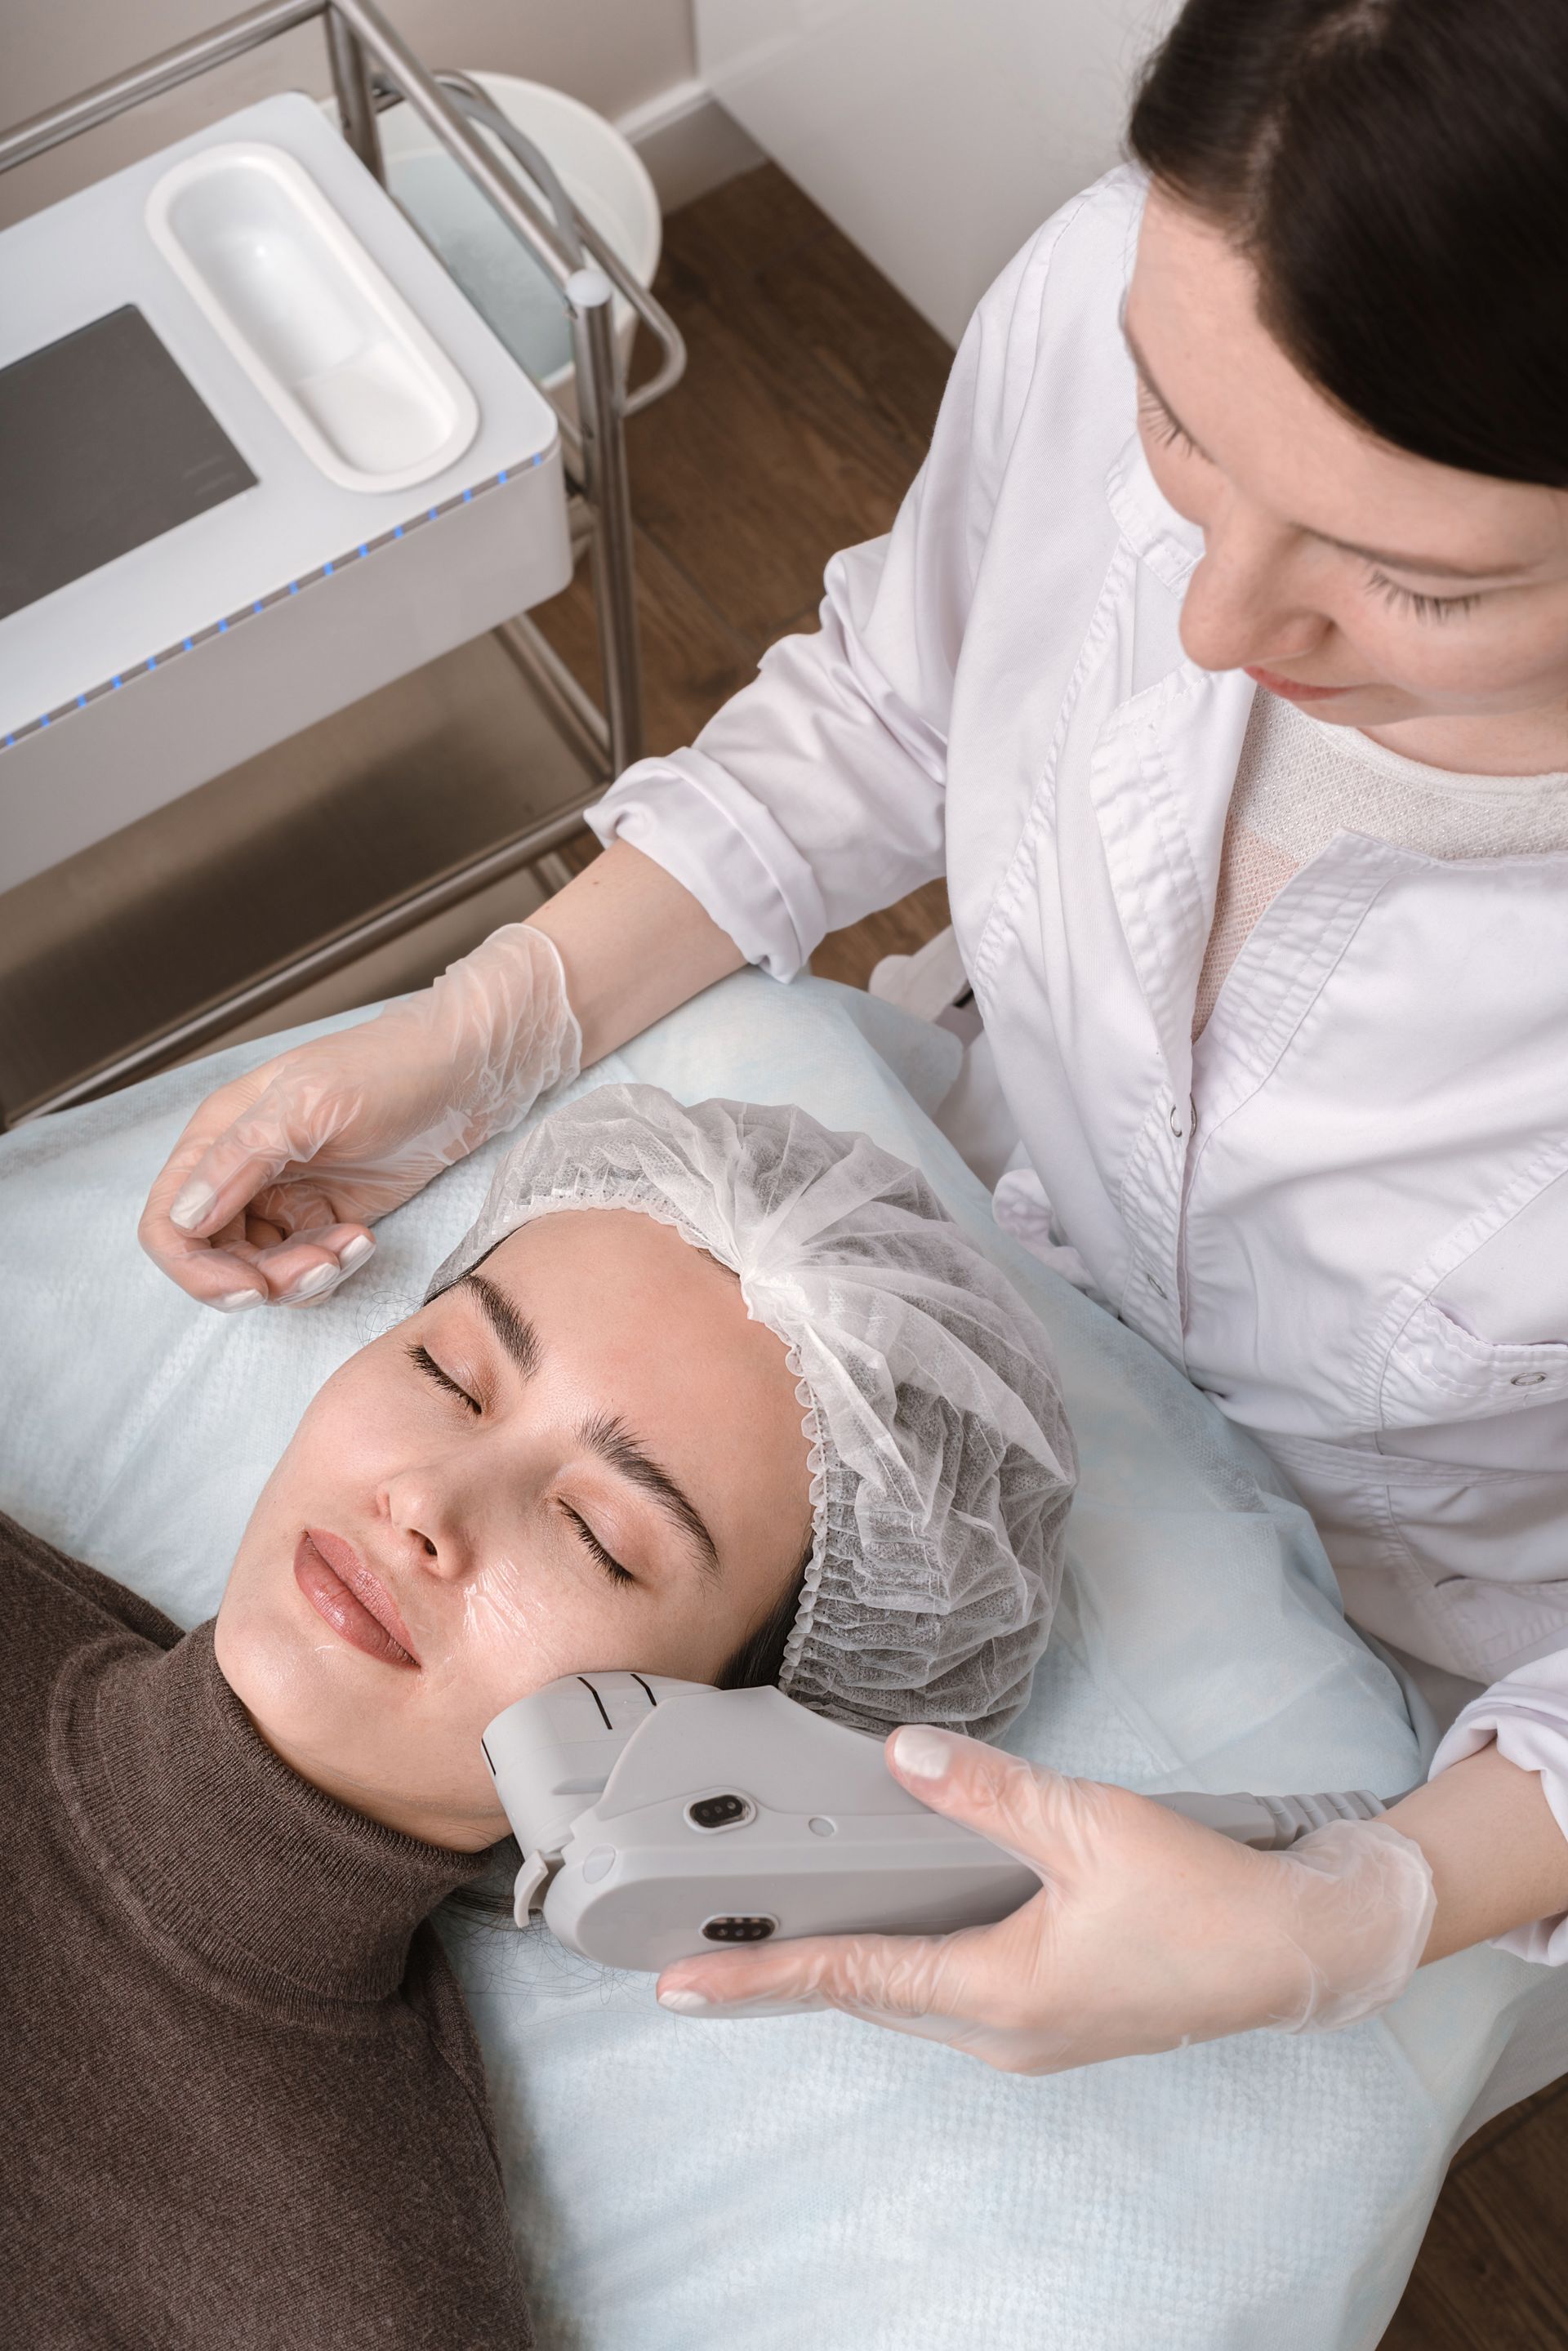 a woman is getting a facial treatment from a doctor